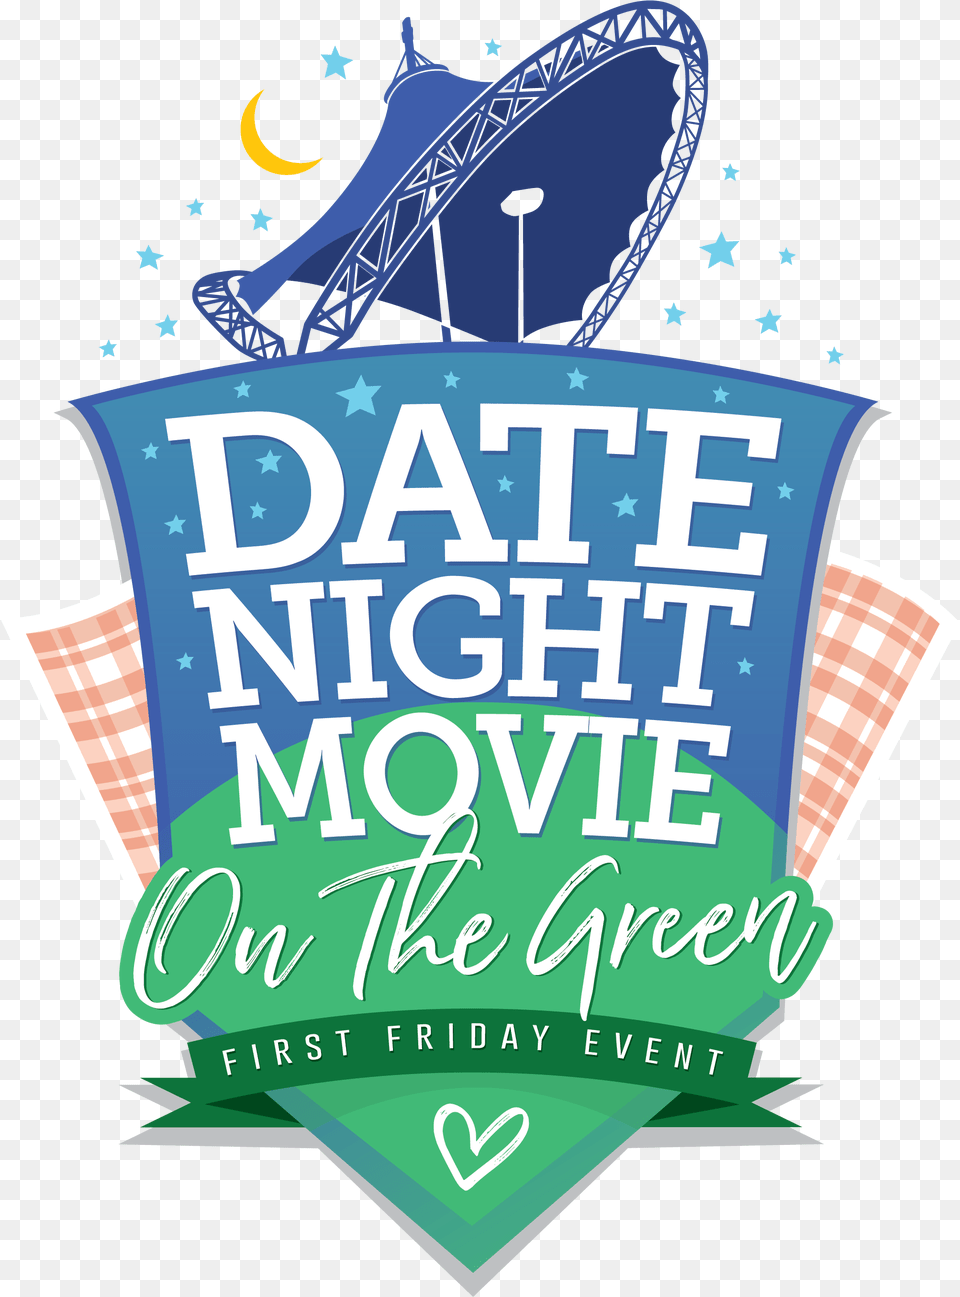 Transparent Movie Night Illustration, Advertisement, Clothing, Hat, Poster Png Image